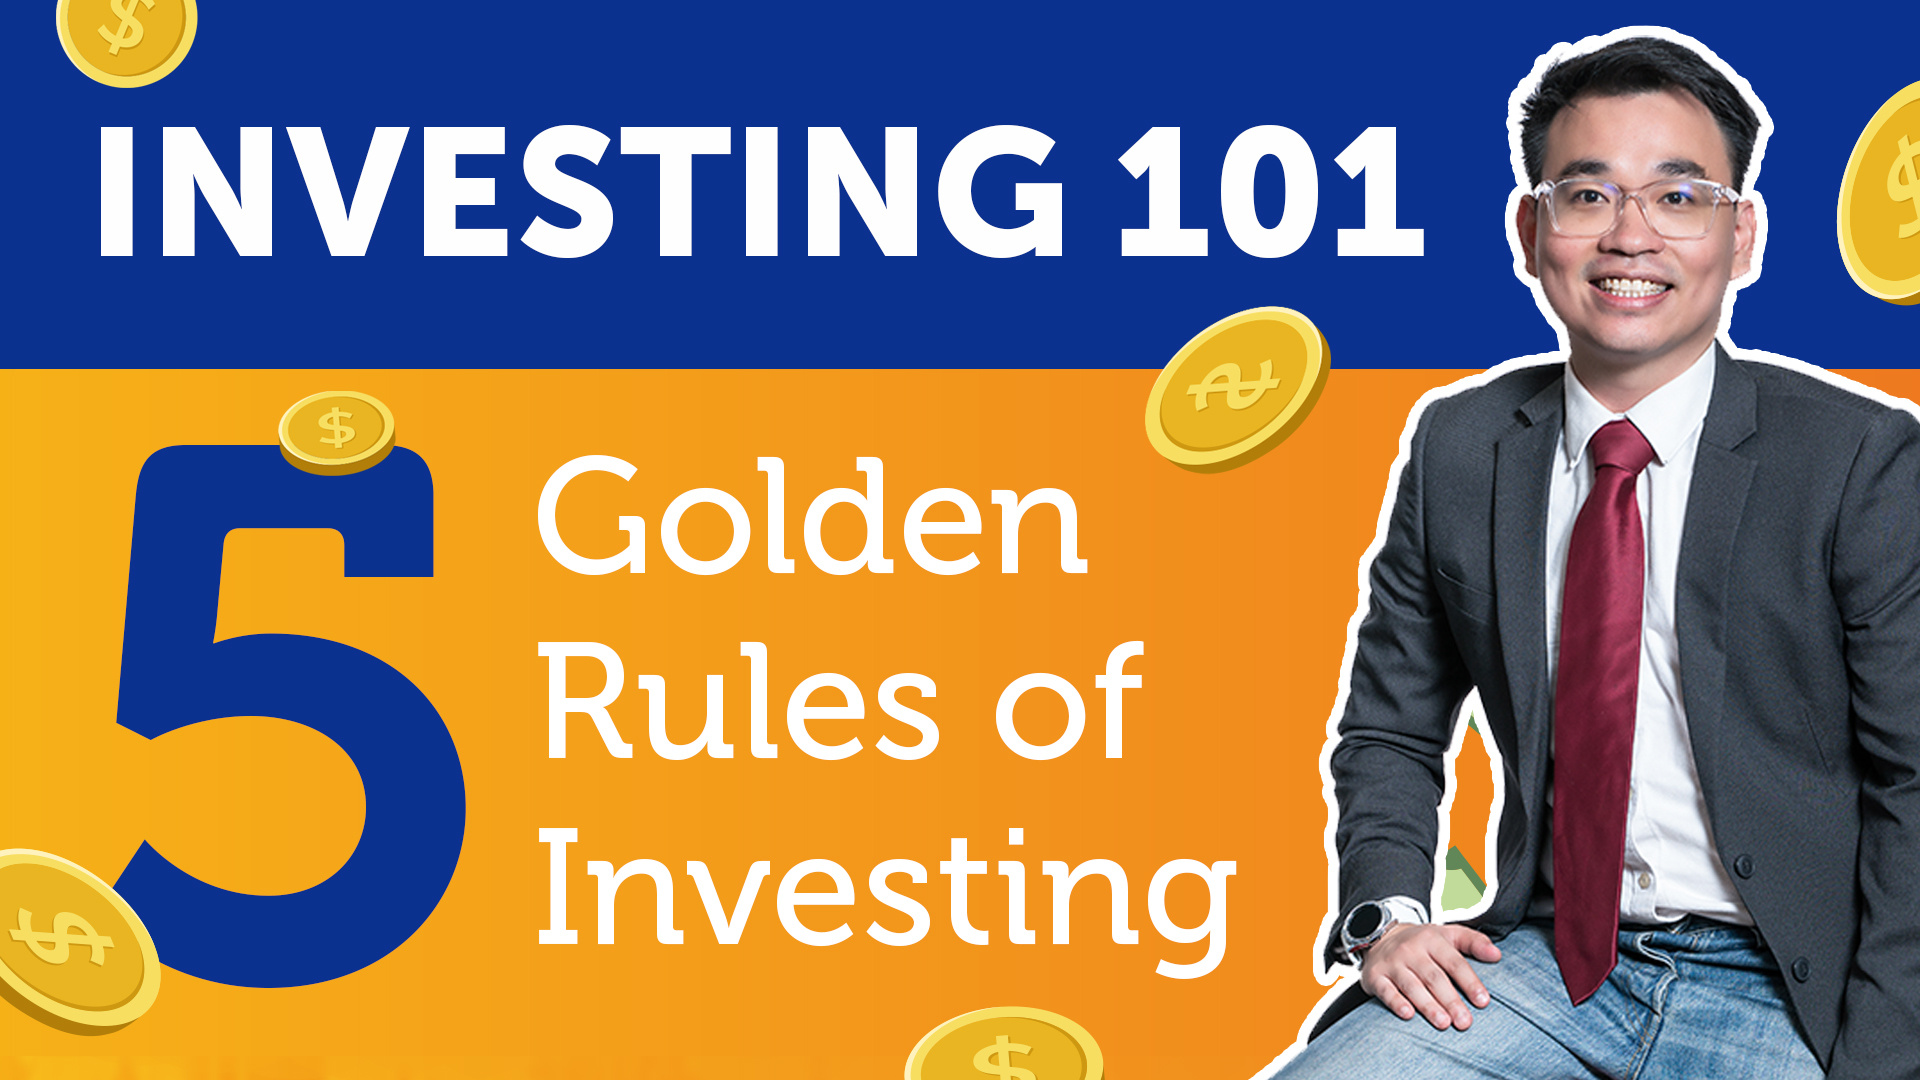 Investing 101 | 5 Golden Rules of Investing